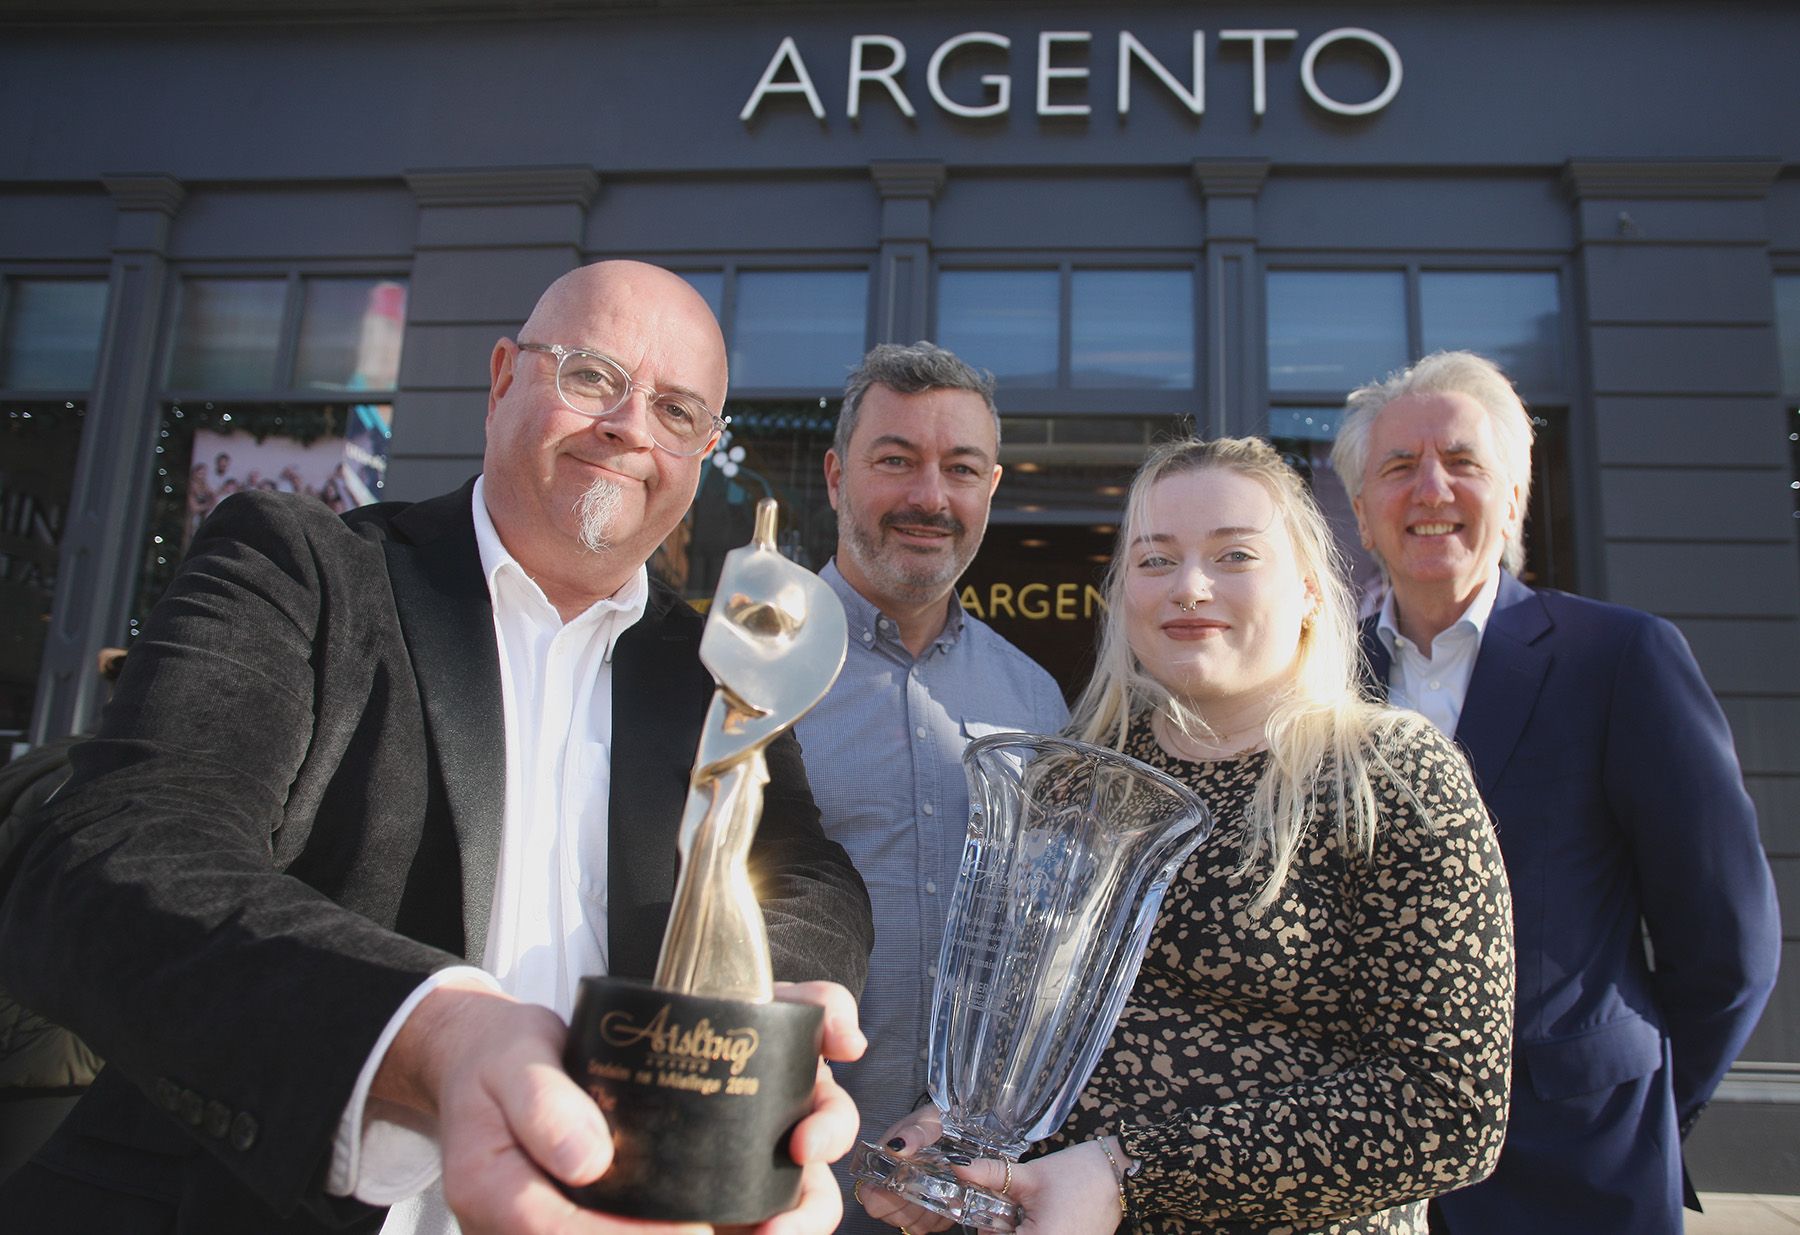 UP FOR GRABS: Last year\'s winner of the Aisling Business Award Greg Maguire of Humain with Argento and Let\'s Go Hydro founder and Aisling sponsor Pete Boyle, Abby Briers of Argento and judging panel member Máirtín Ó Muilleoir